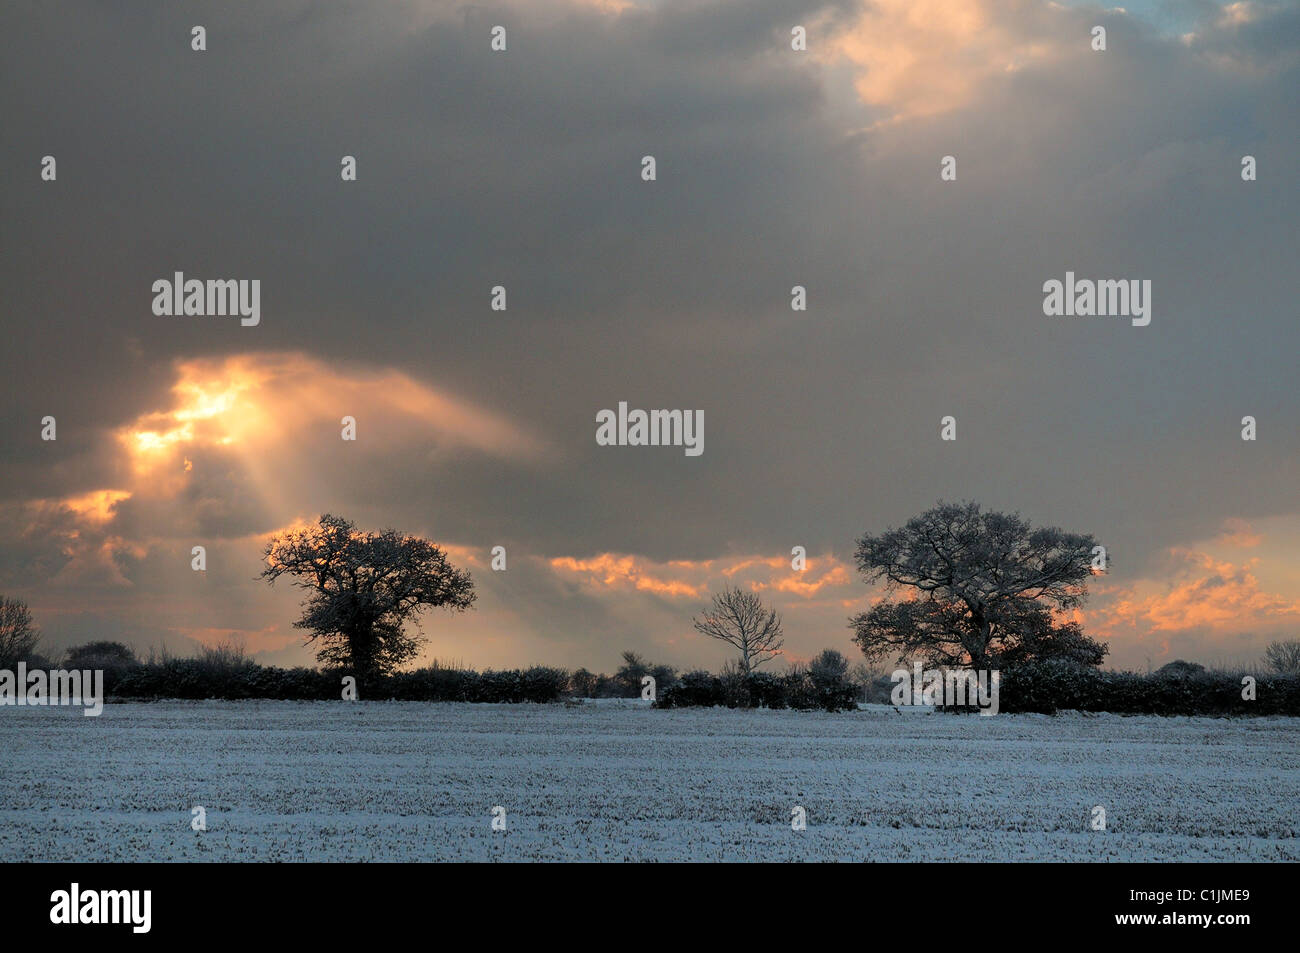 Moody Skies & Sunbeams, Tunstall Suffolk following first snow fall as Autumn turns to Winter. November 2010 Stock Photo